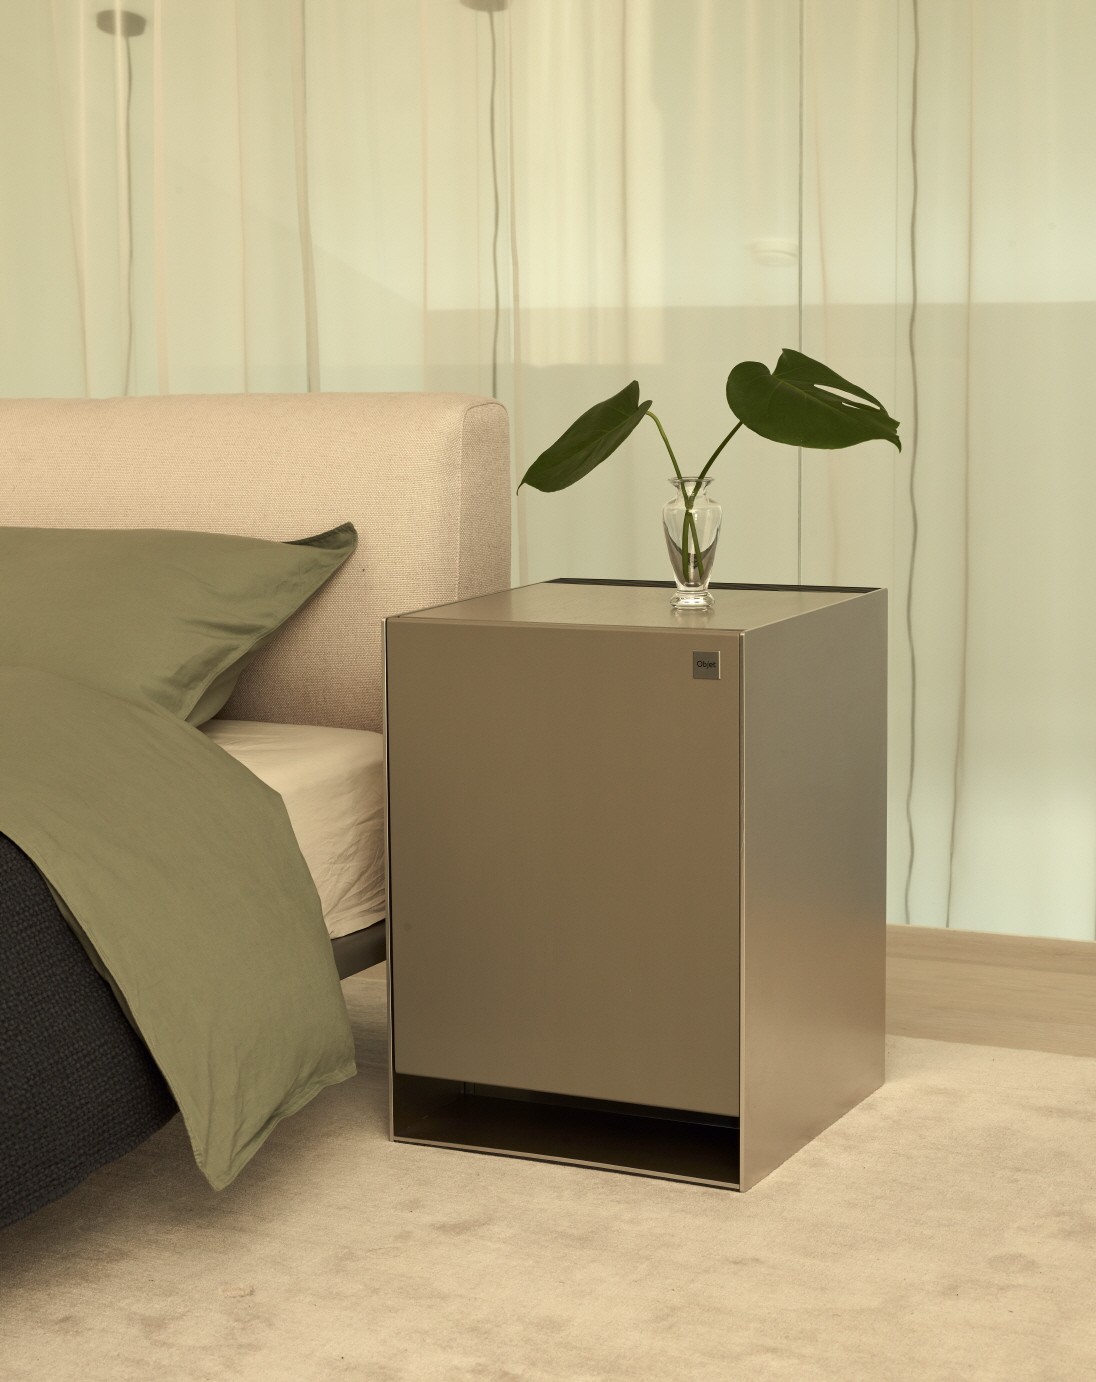 LG OBJET Air Purifier with a plant placed on top of it positioned next to a bed